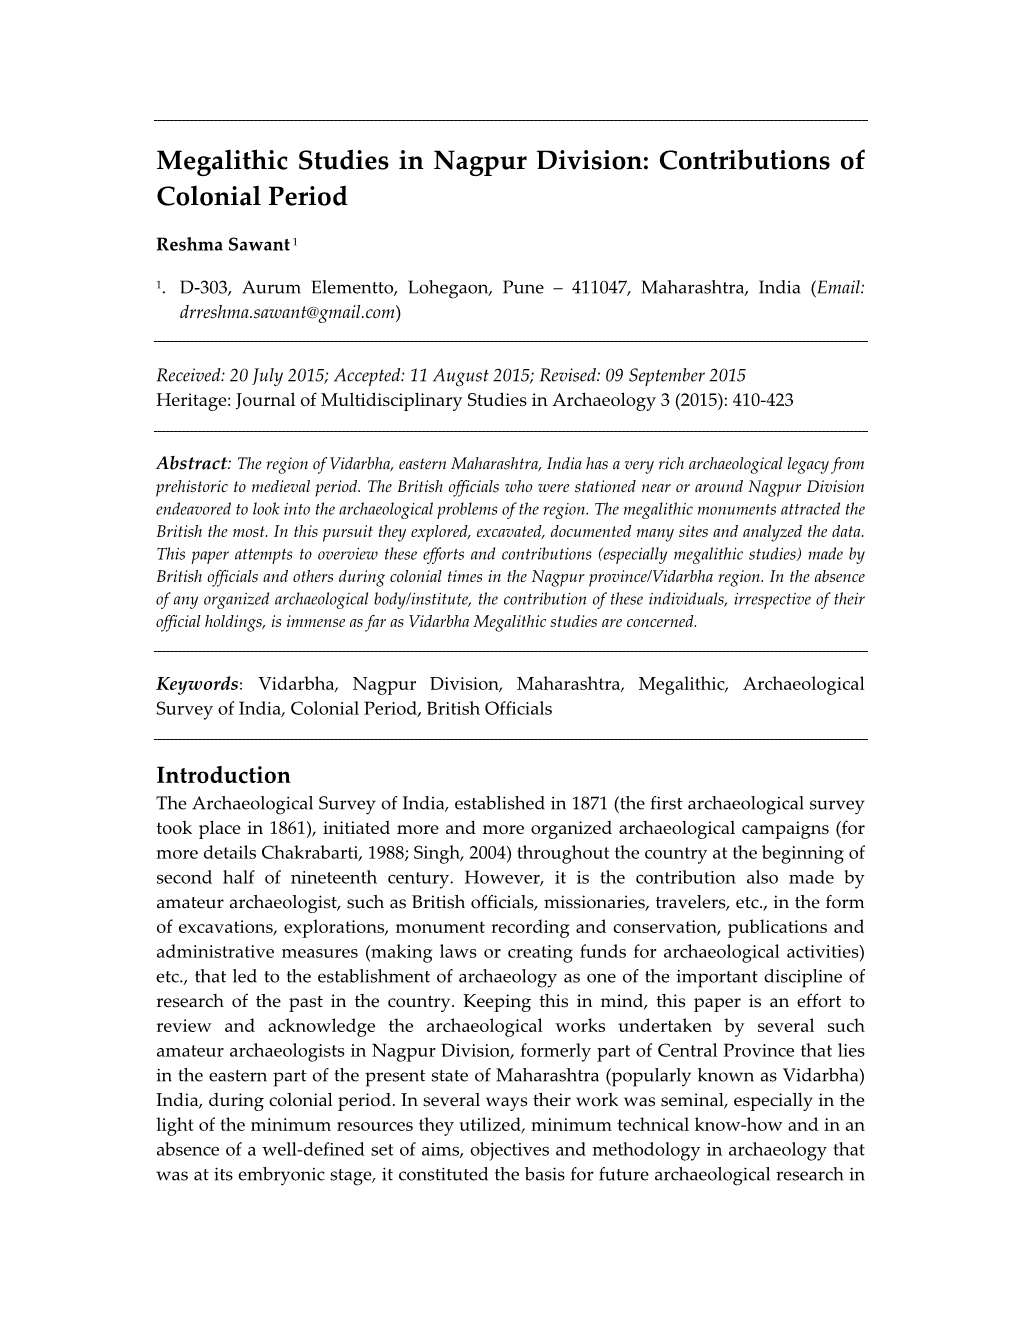 Megalithic Studies in Nagpur Division: Contributions of Colonial Period